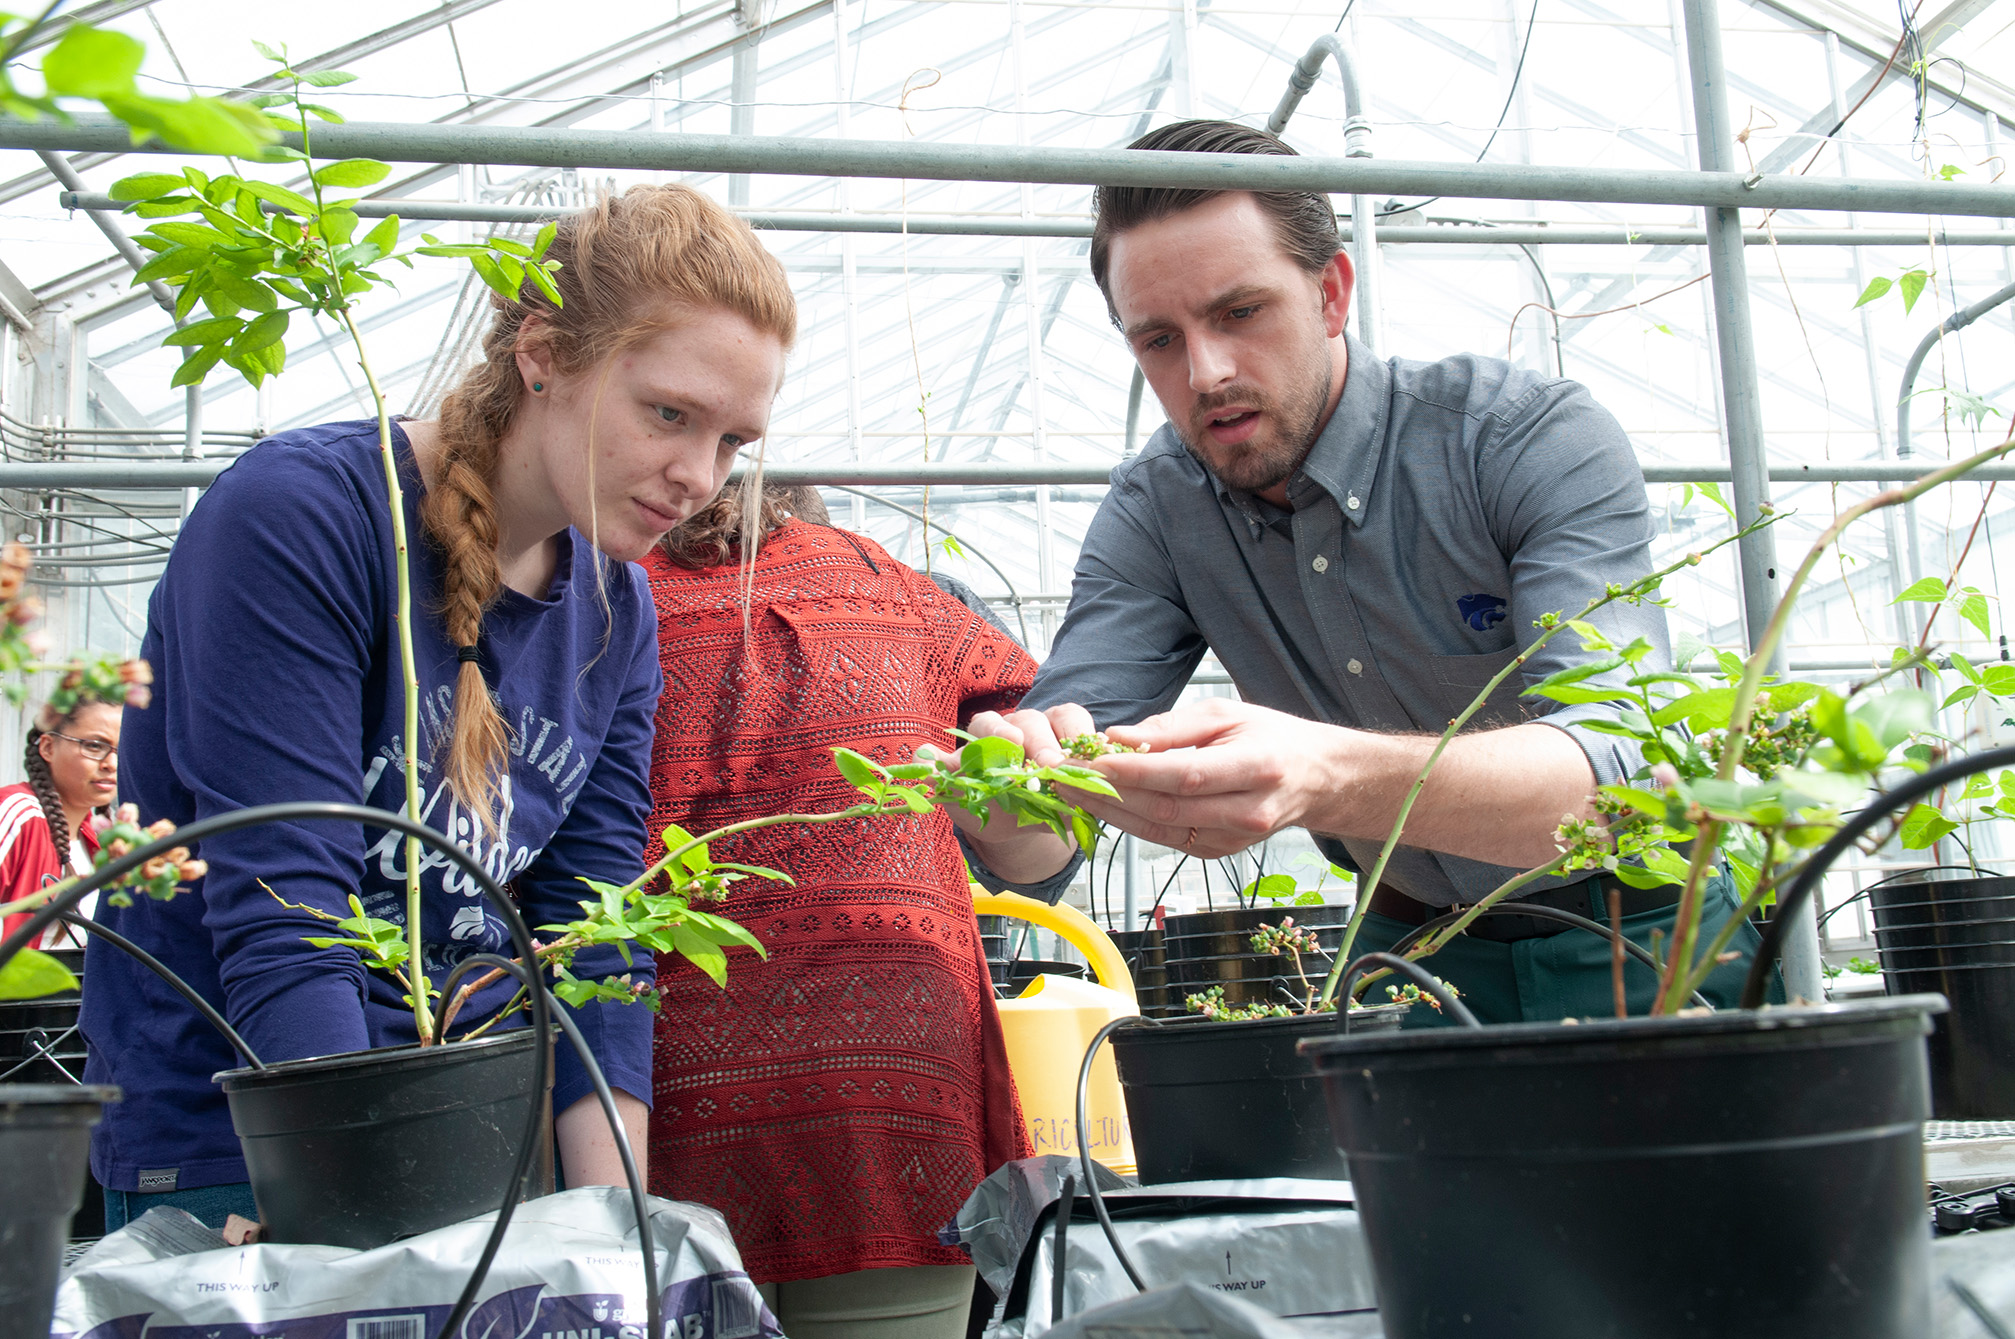 Researchers discussing plant health